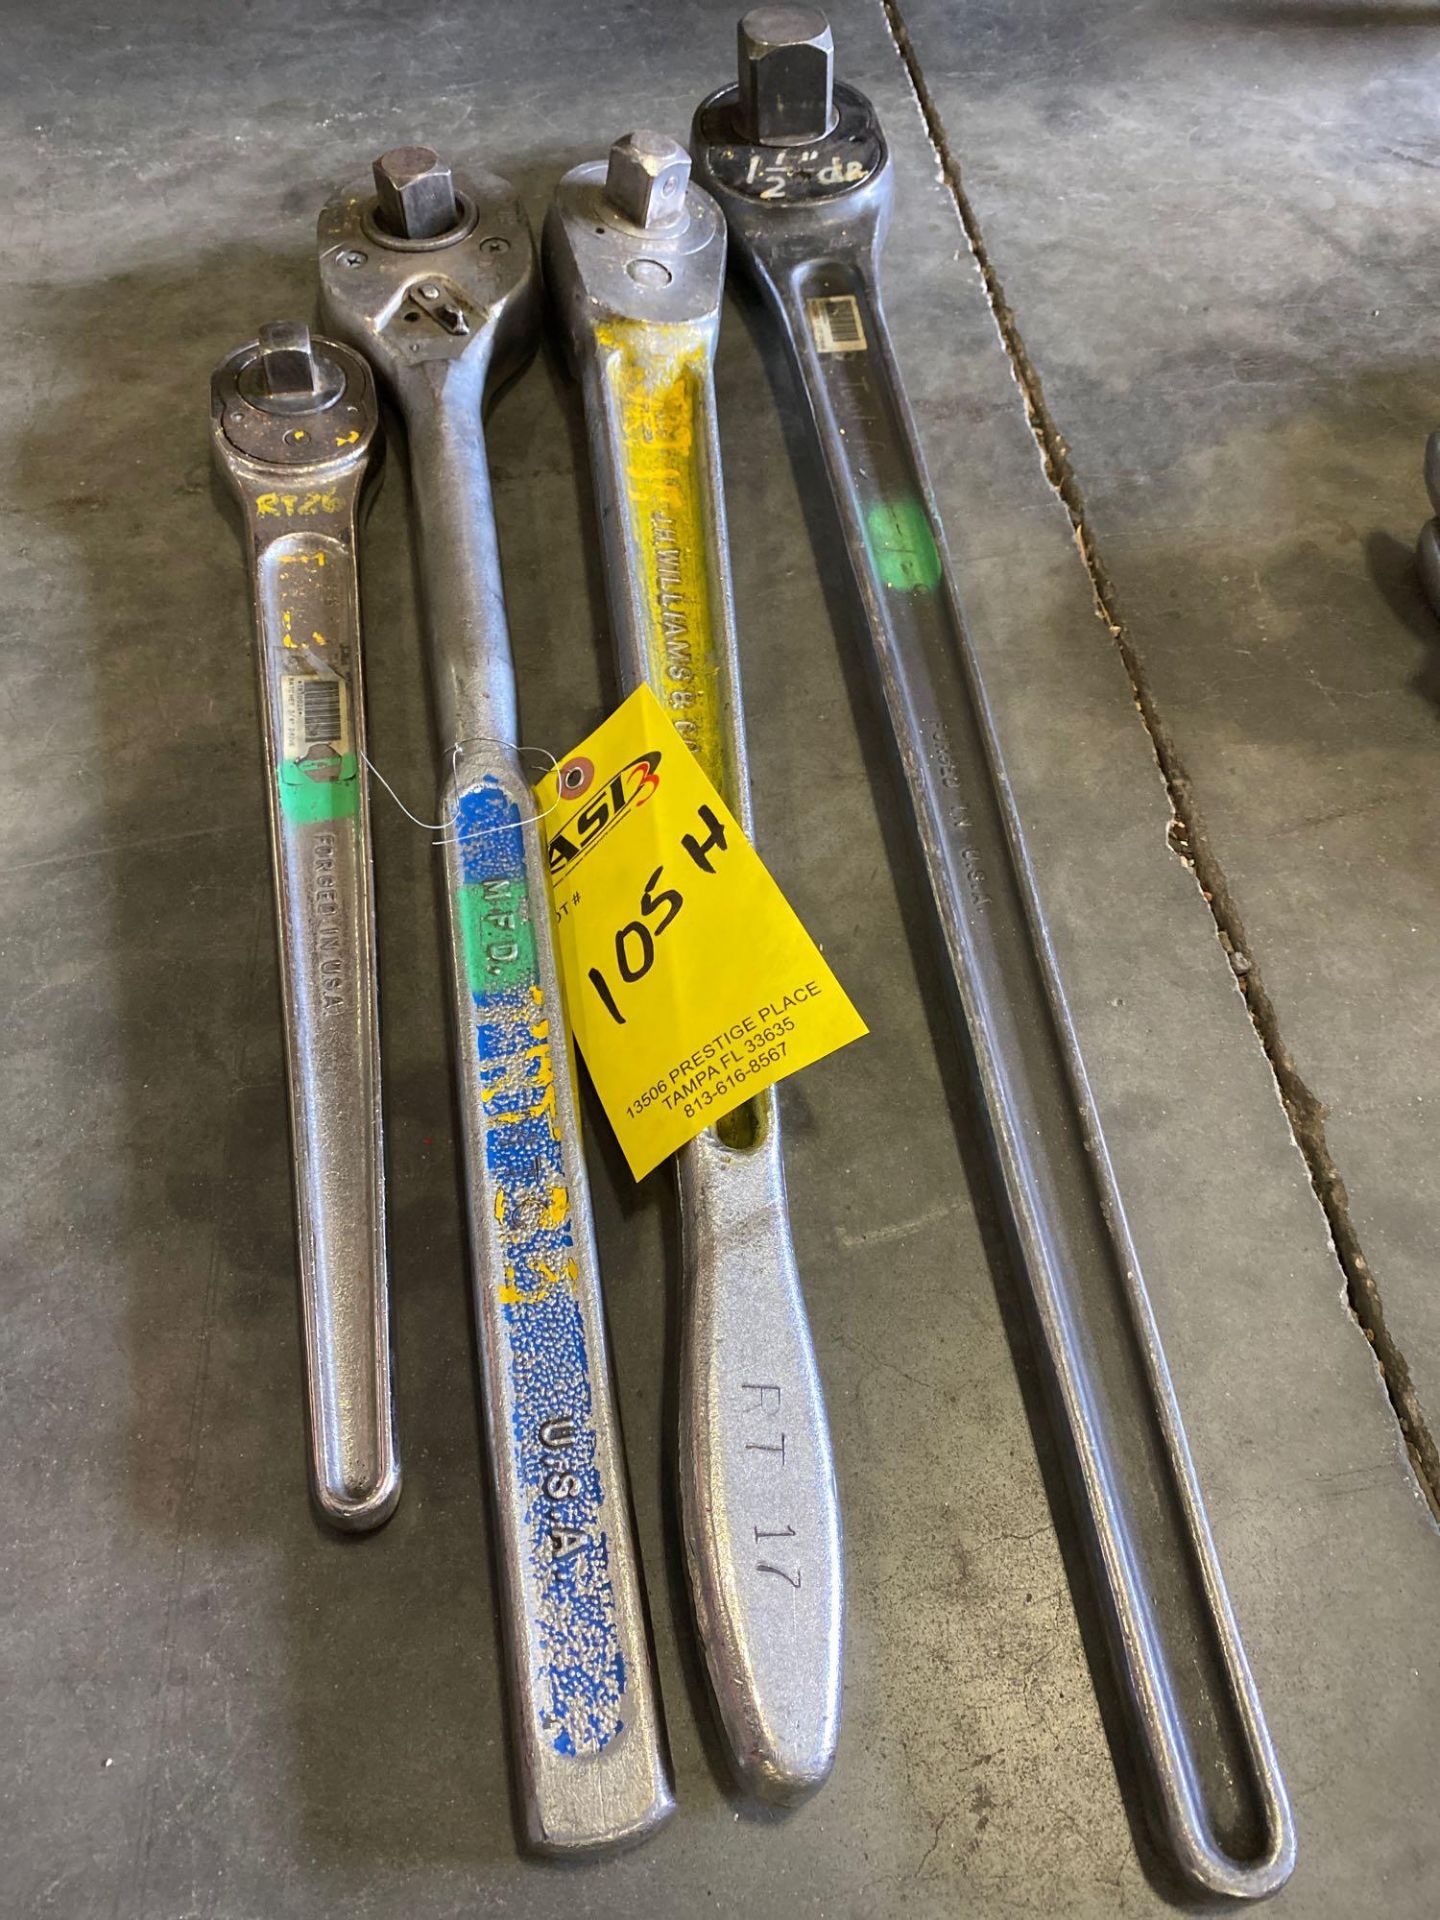 LARGE RATCHETS, (1) 1 1/2” ARMSTRONG, (1) 1” WILLIAMS SUPERRATCHET, (1) 1” PROTO 5849, (1) 3/4” ARMS